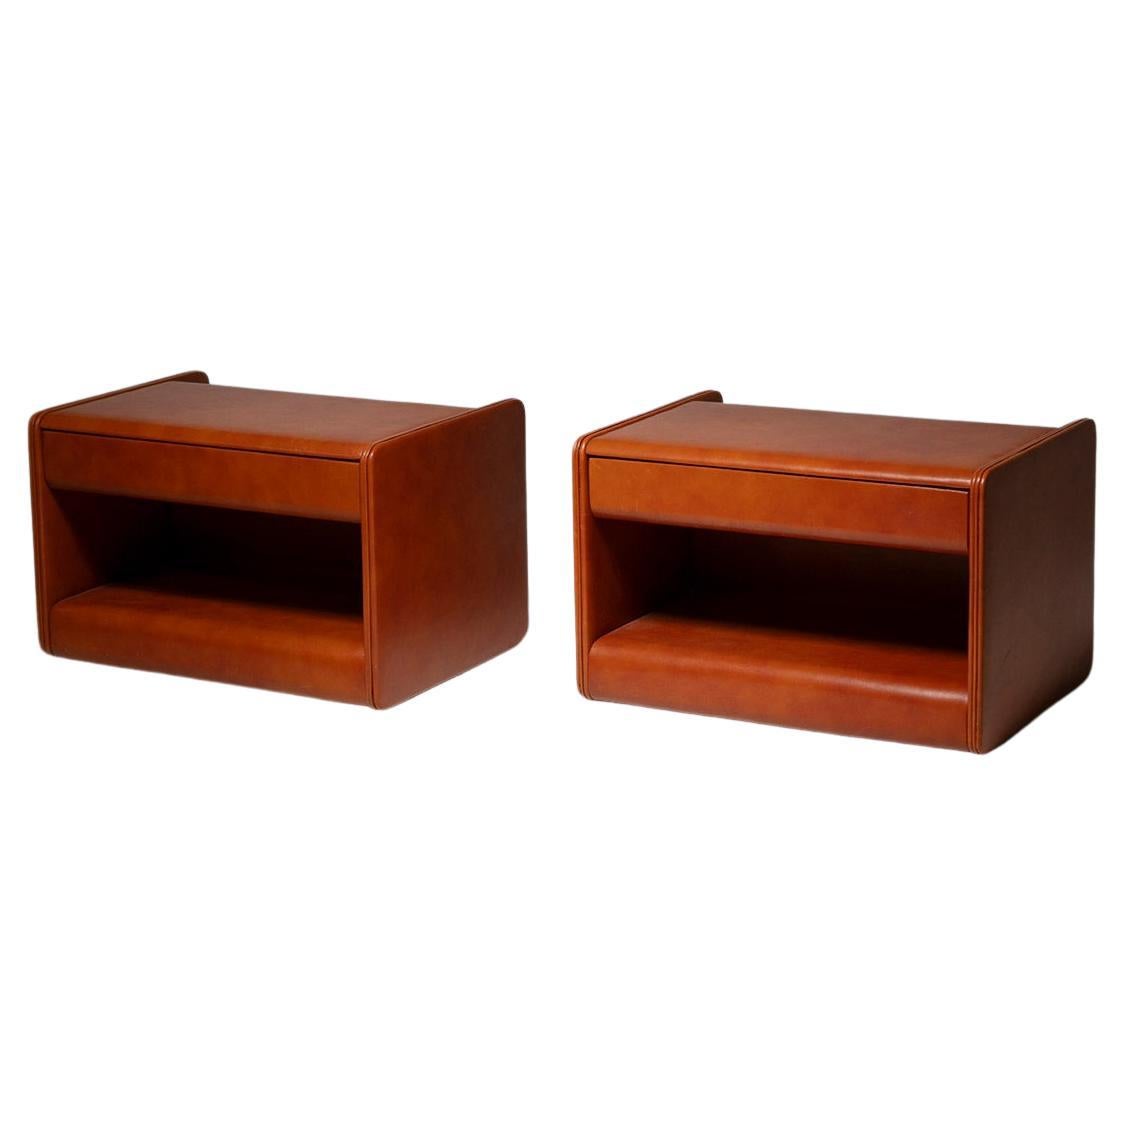 Pair of Leather Night Stands by Luigi Massoni for Poltrona Frau, Italy, 1960s